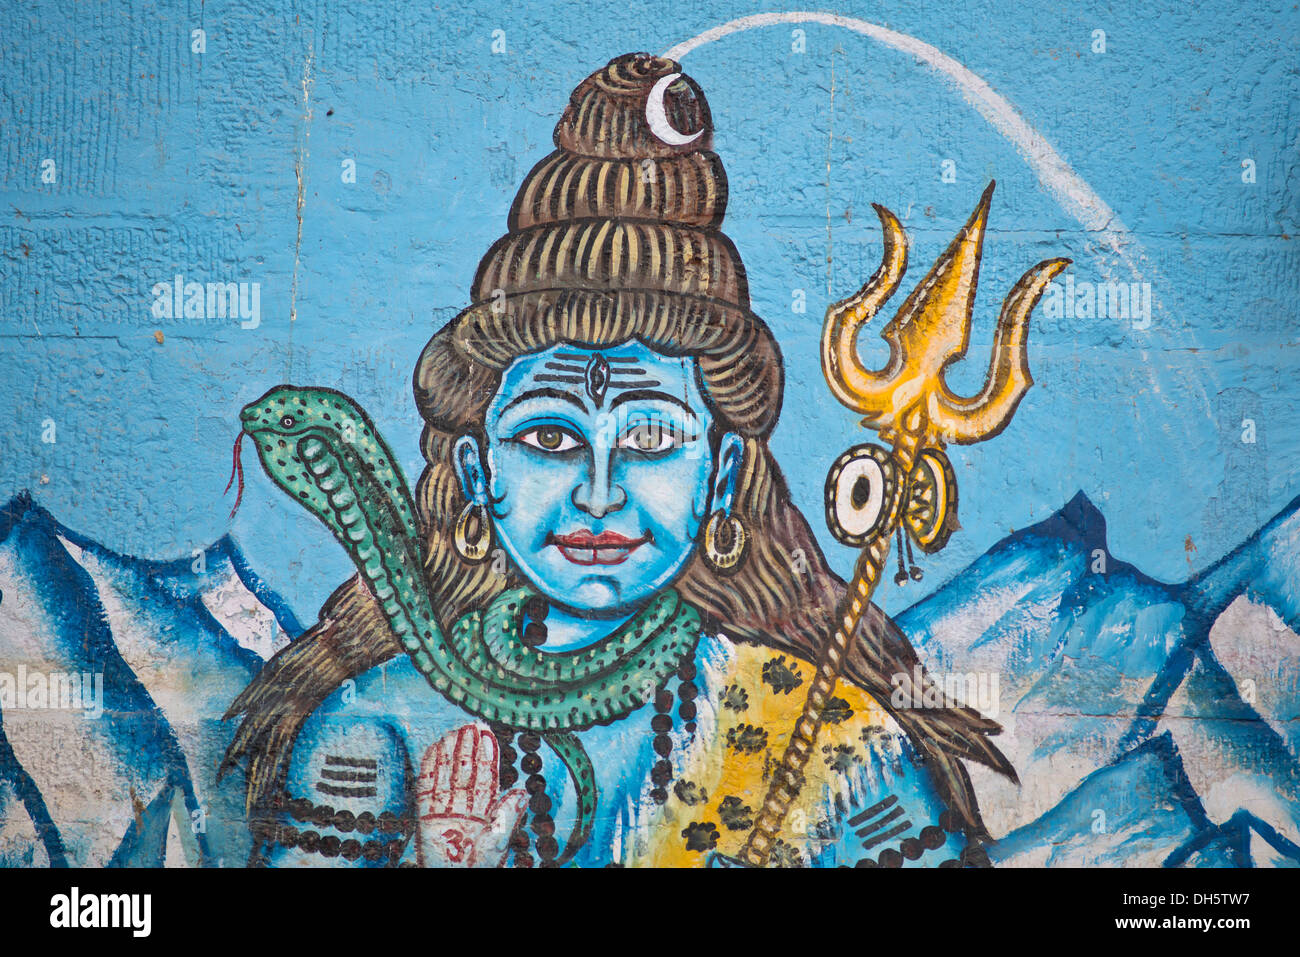 The Hindu god Shiva painted on the wall of a house on the banks of the Ganges River, Varanasi, Uttar Pradesh, India Stock Photo